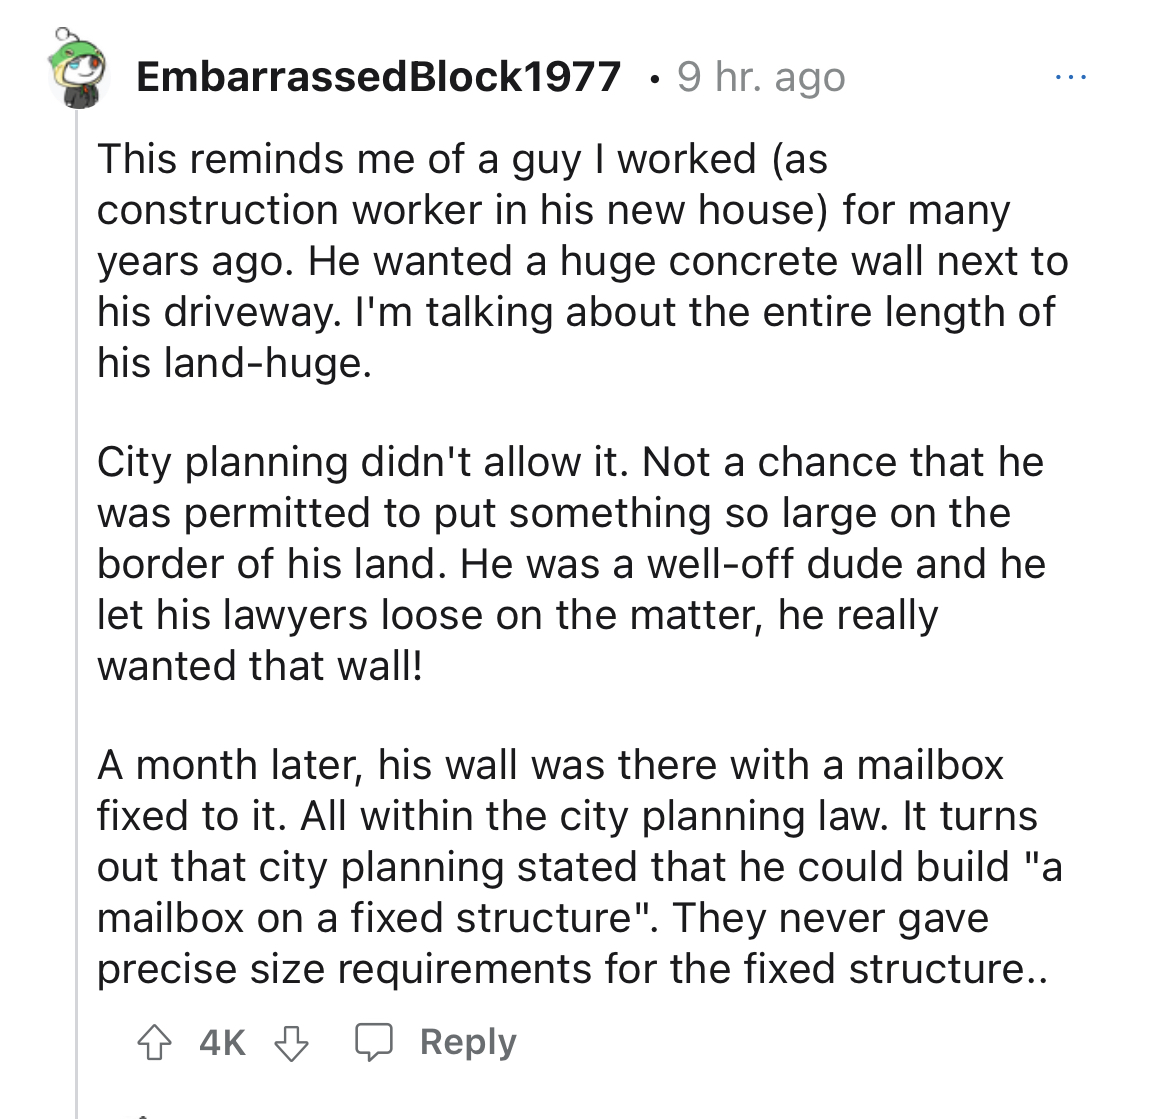 HOA instant karma story - document - EmbarrassedBlock1977 9 hr. ago This reminds me of a guy I worked as construction worker in his new house for many years ago. He wanted a huge concrete wall next to his driveway. I'm talking about the entire length of h